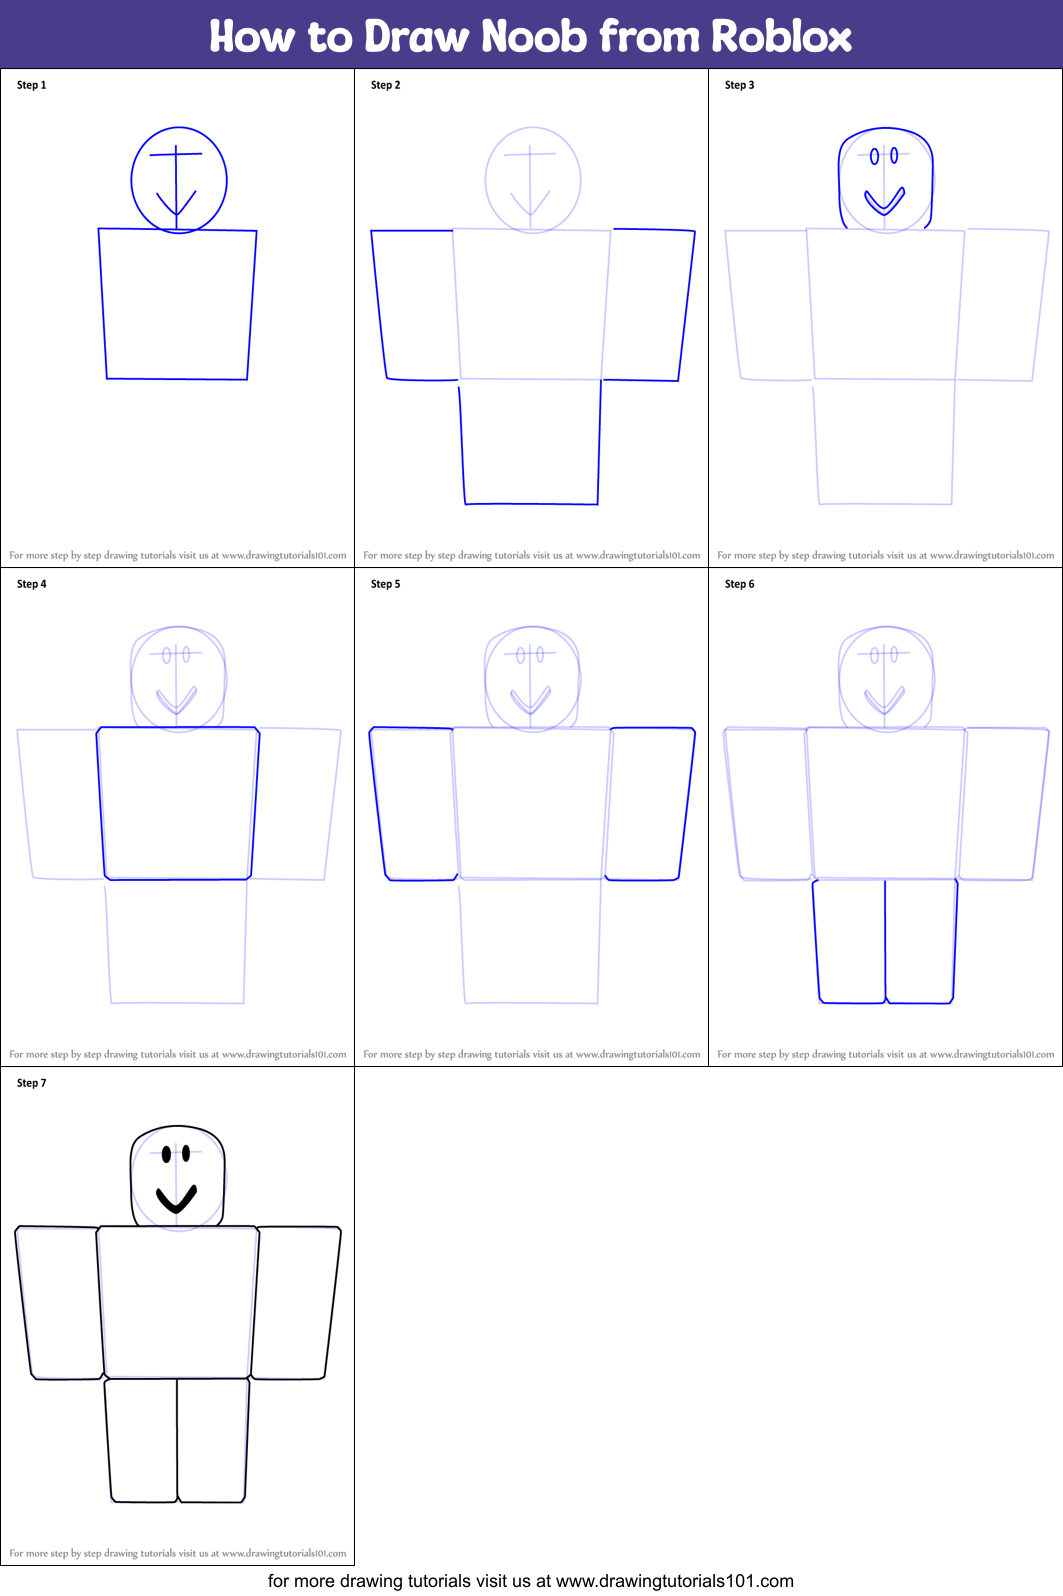 How to Draw a Roblox Noob  Learn to Draw step by step 